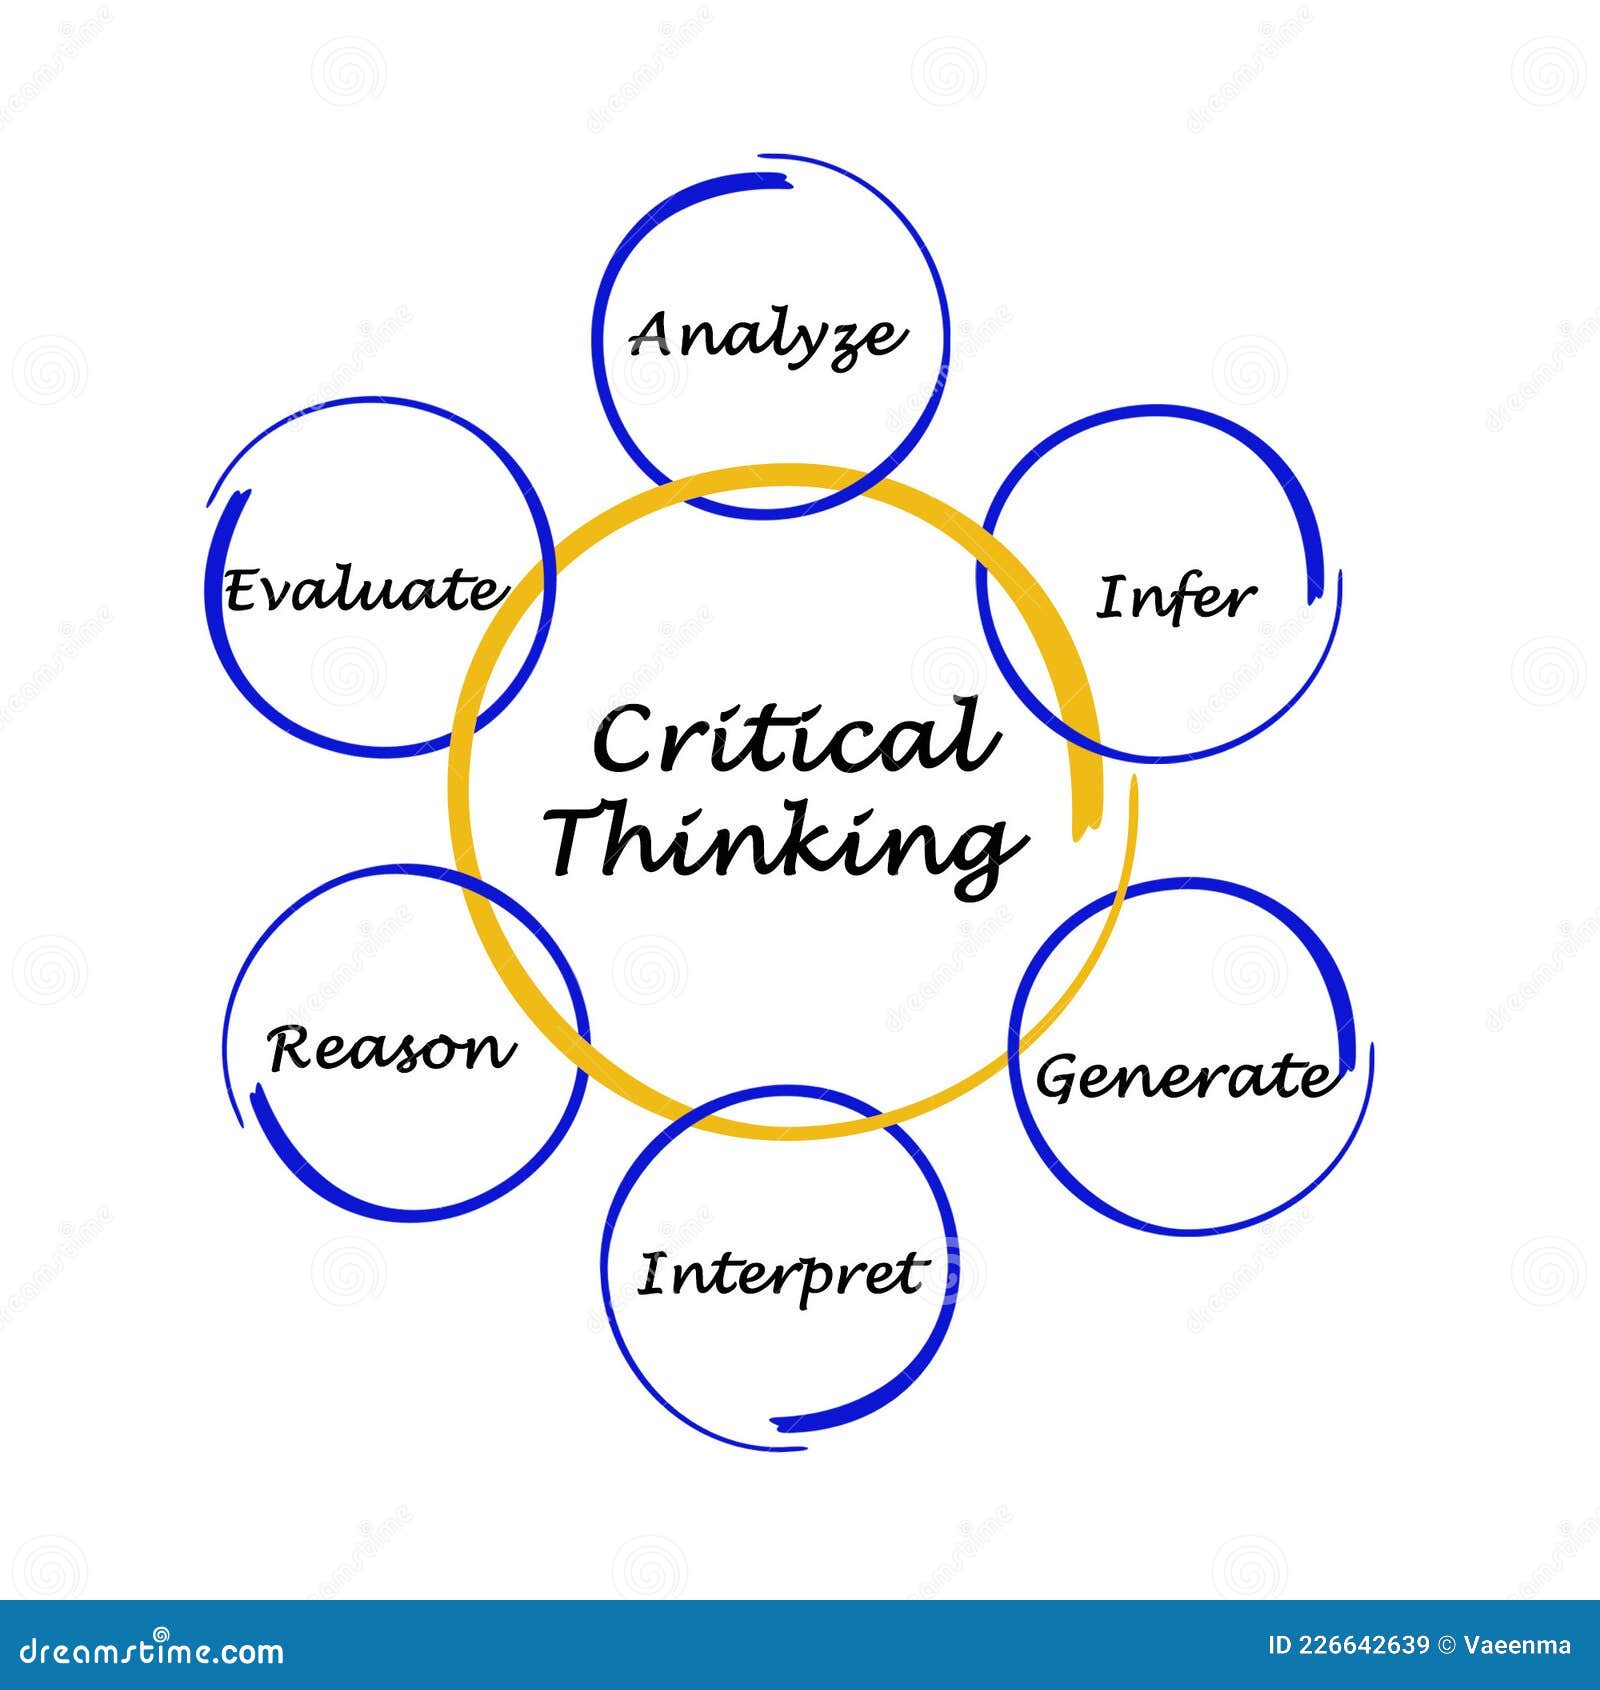 what are the 3 components of critical thinking